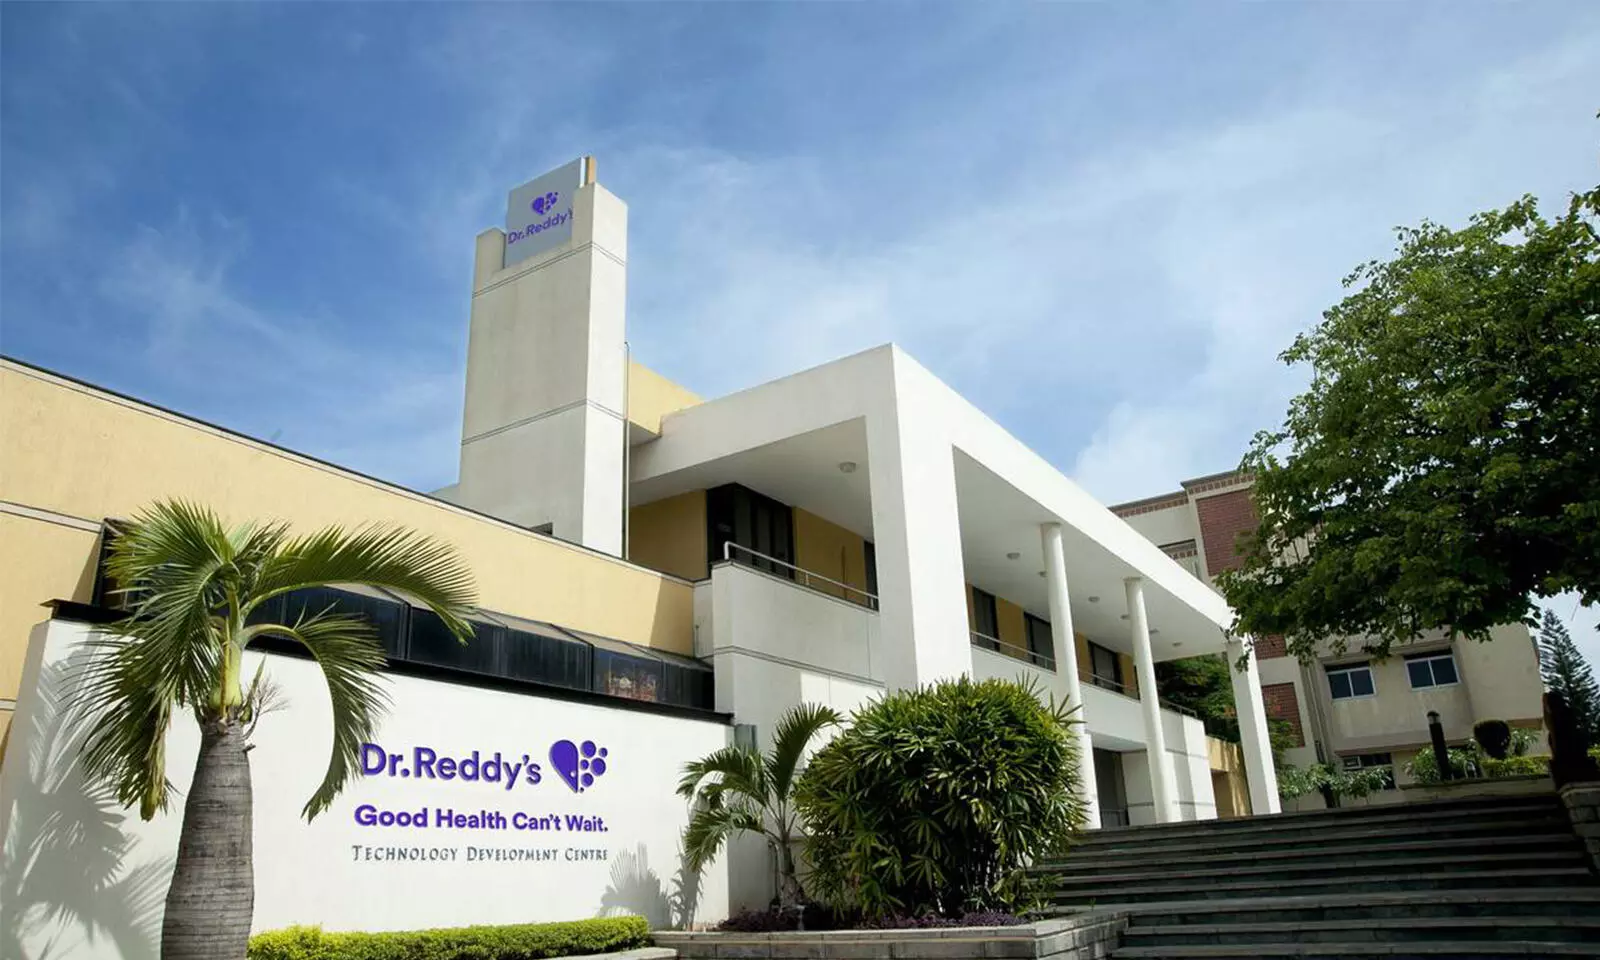 Dr Reddys open to making Pfizer COVID pill after deal with Merck